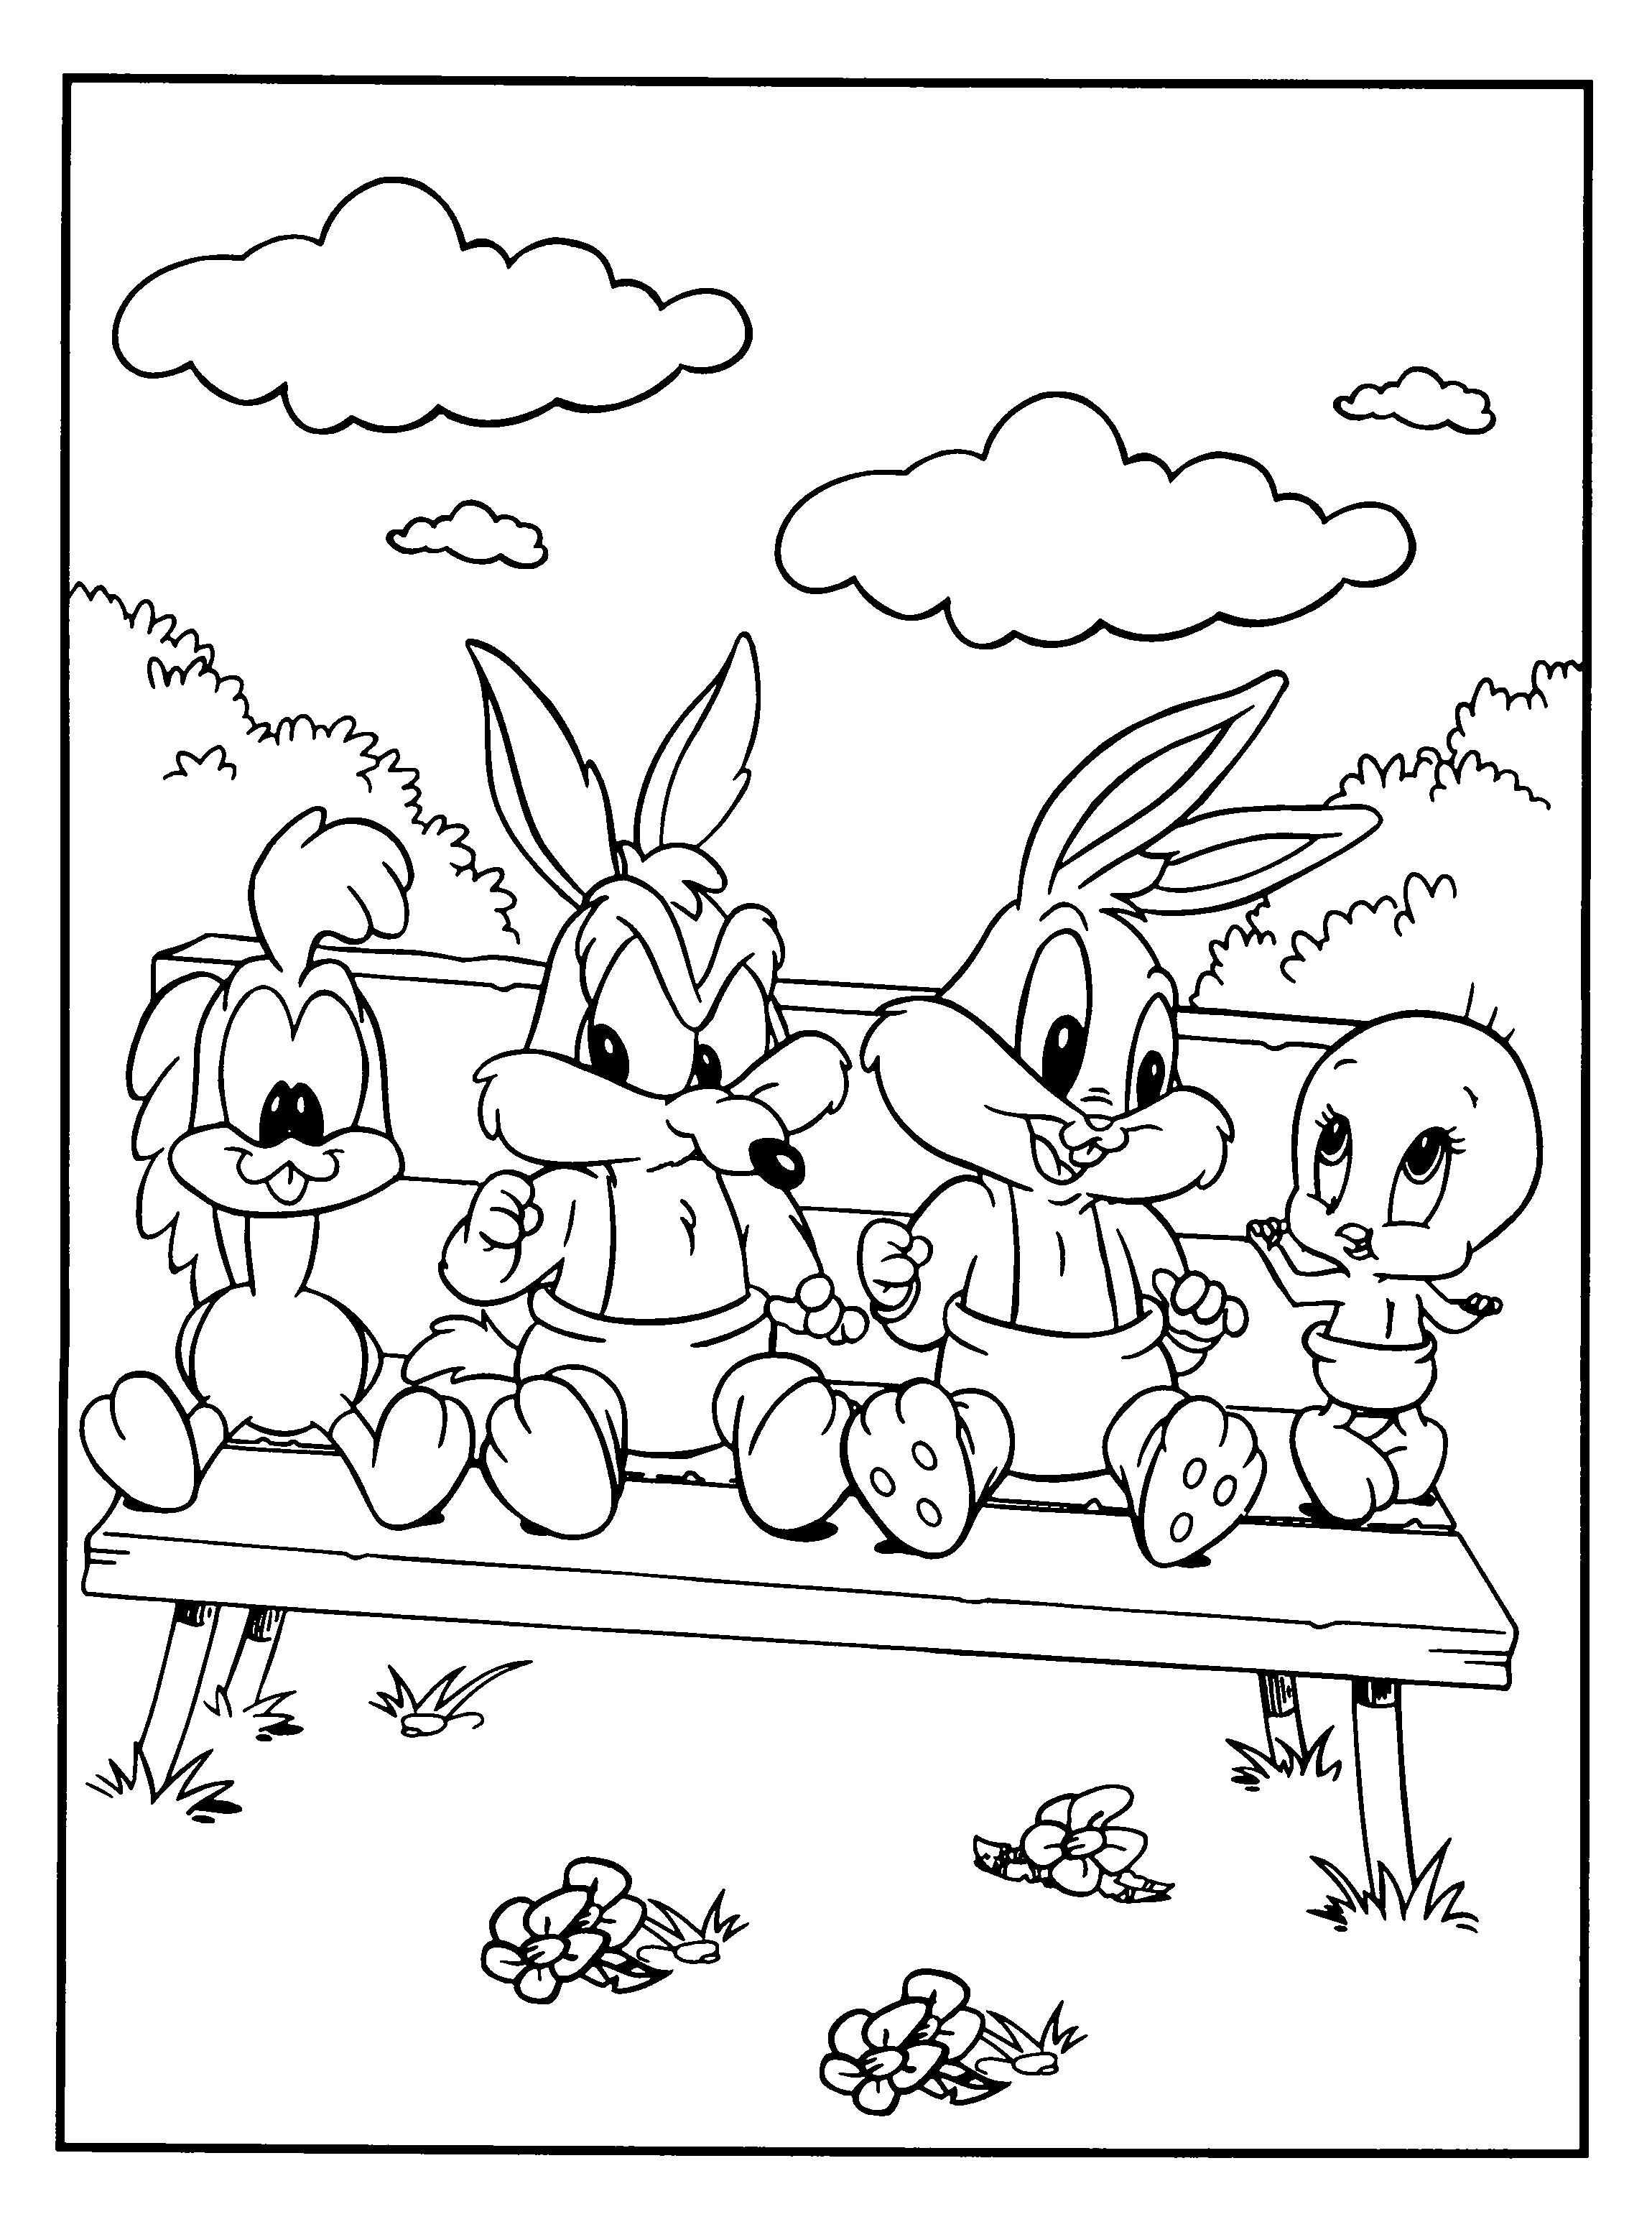 animated-coloring-pages-looney-tunes-image-0018